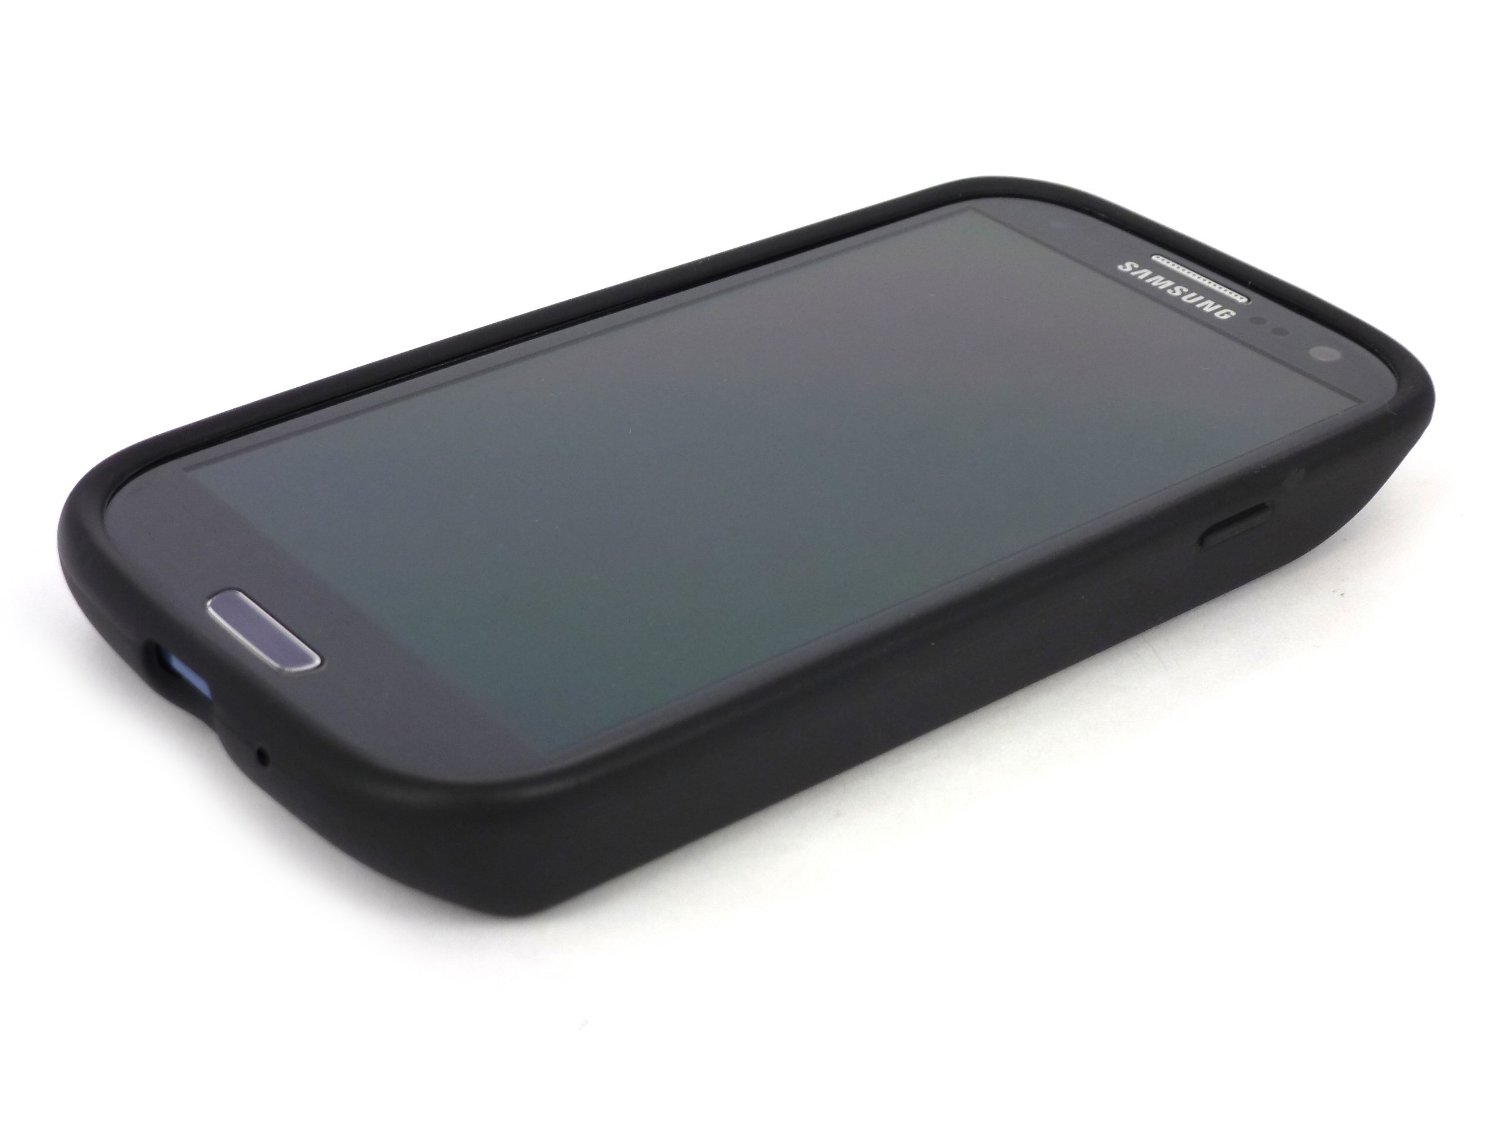 The ZeroLemon Samsung Galaxy S3 extended battery offers long battery life but adds bulk.